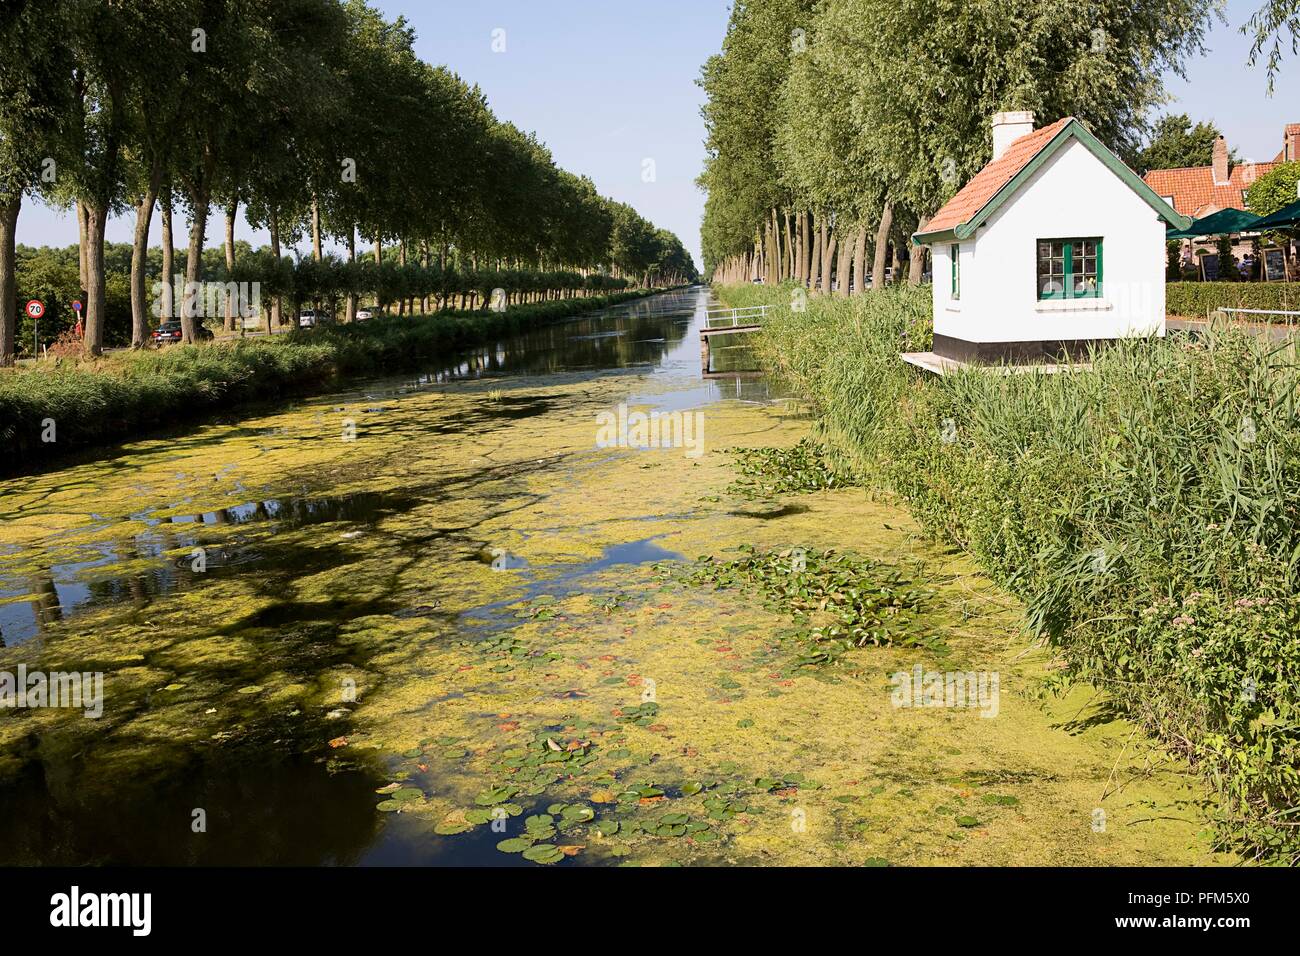 Belgium, Damme, aquatic weed on surface of treelined canal Stock Photo